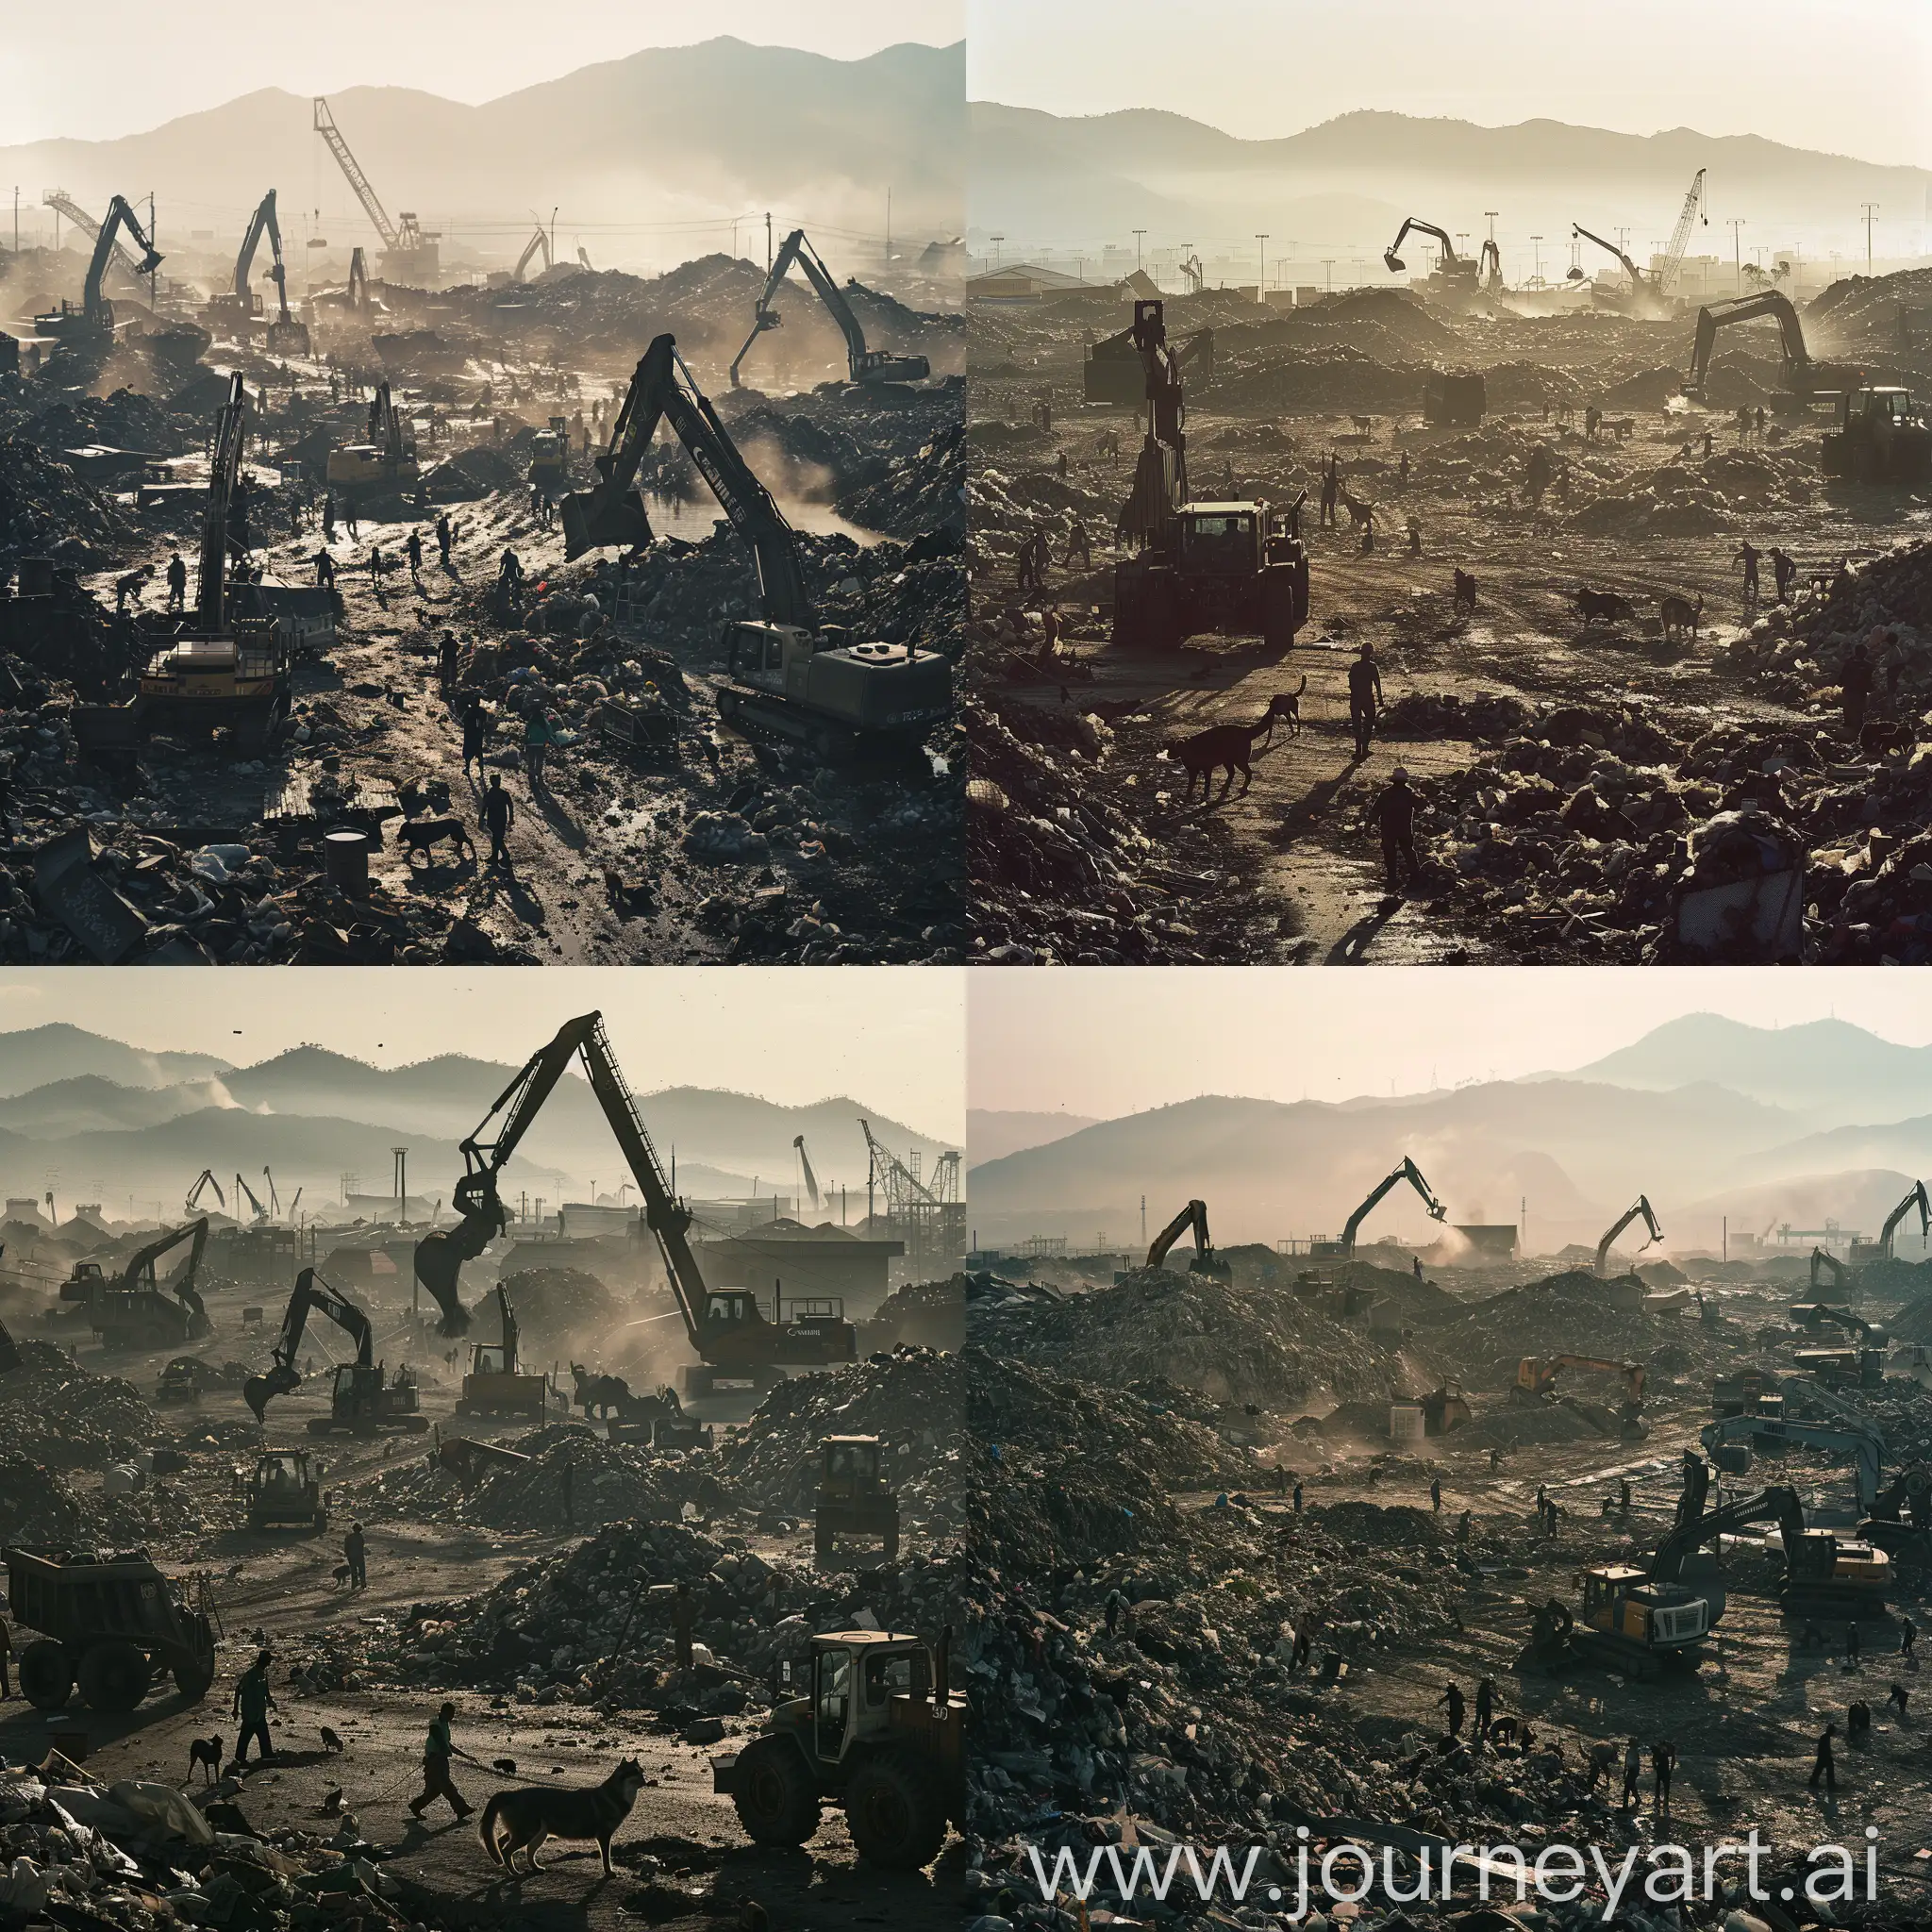 A bustling scene unfolds as a symphony of activity combines with nature's indifference. A sprawling landfill stretches across the landscape, framed by mountains in the distance. Amidst the chaos, workers toil tirelessly, their silhouettes outlined against the backdrop of towering piles of garbage. Giant machines roar to life, their mechanical arms lifting refuse with precision, captured in stunning detail by a Canon camera boasting 50 megapixels. Amidst this urban jungle, resilient creatures navigate their way, with stray cats and dogs weaving through the debris, adding a poignant touch to this surreal tableau. It's a sight both haunting and captivating, a testament to the resilience of life in the most unexpected of places.